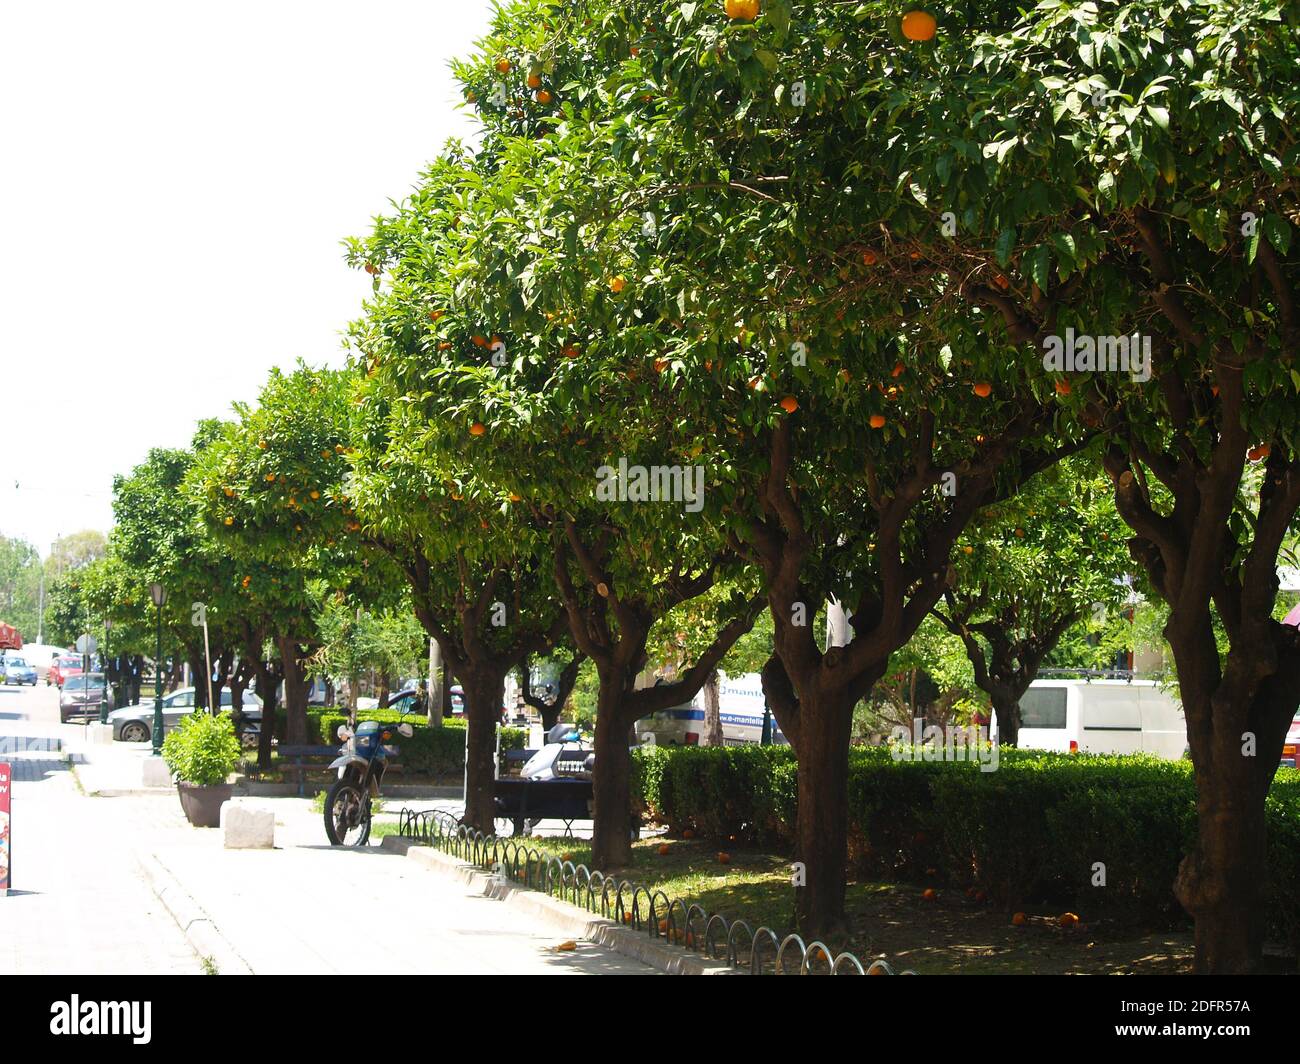 Oranges trees on the Trion Navarchon Street in Patras, Greece Stock Photo